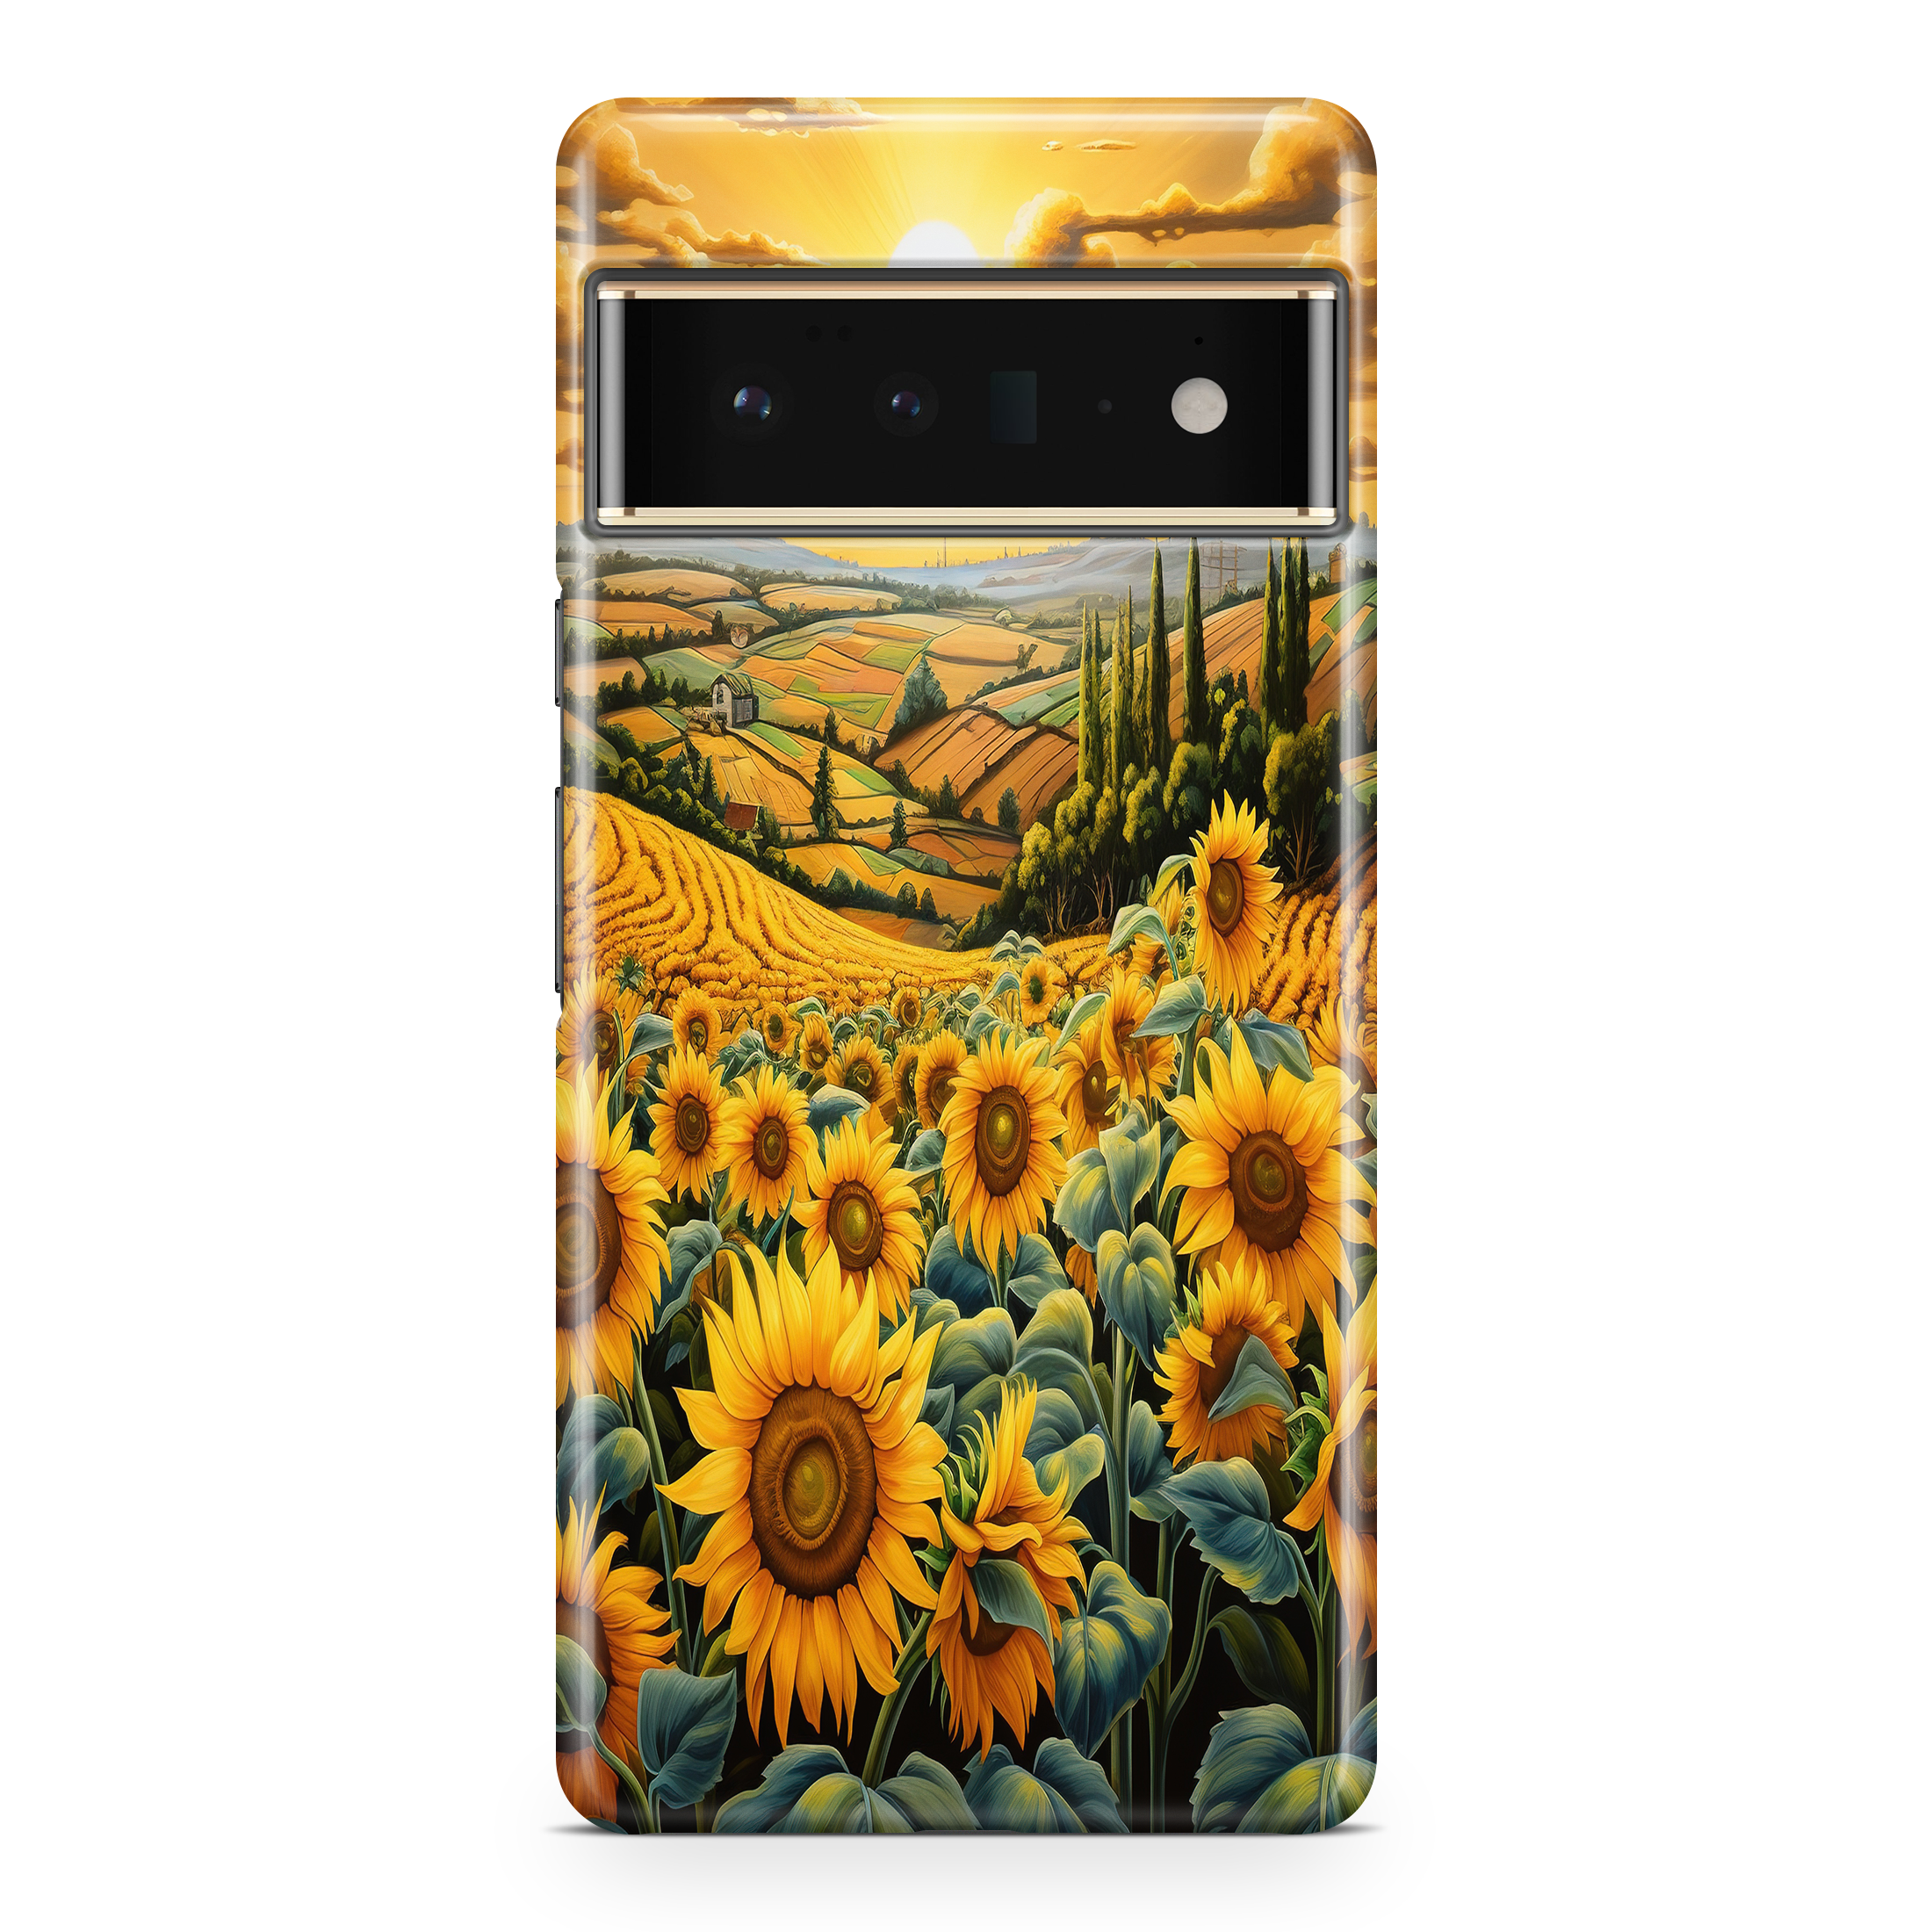 Sunflower Fields - Google phone case designs by CaseSwagger